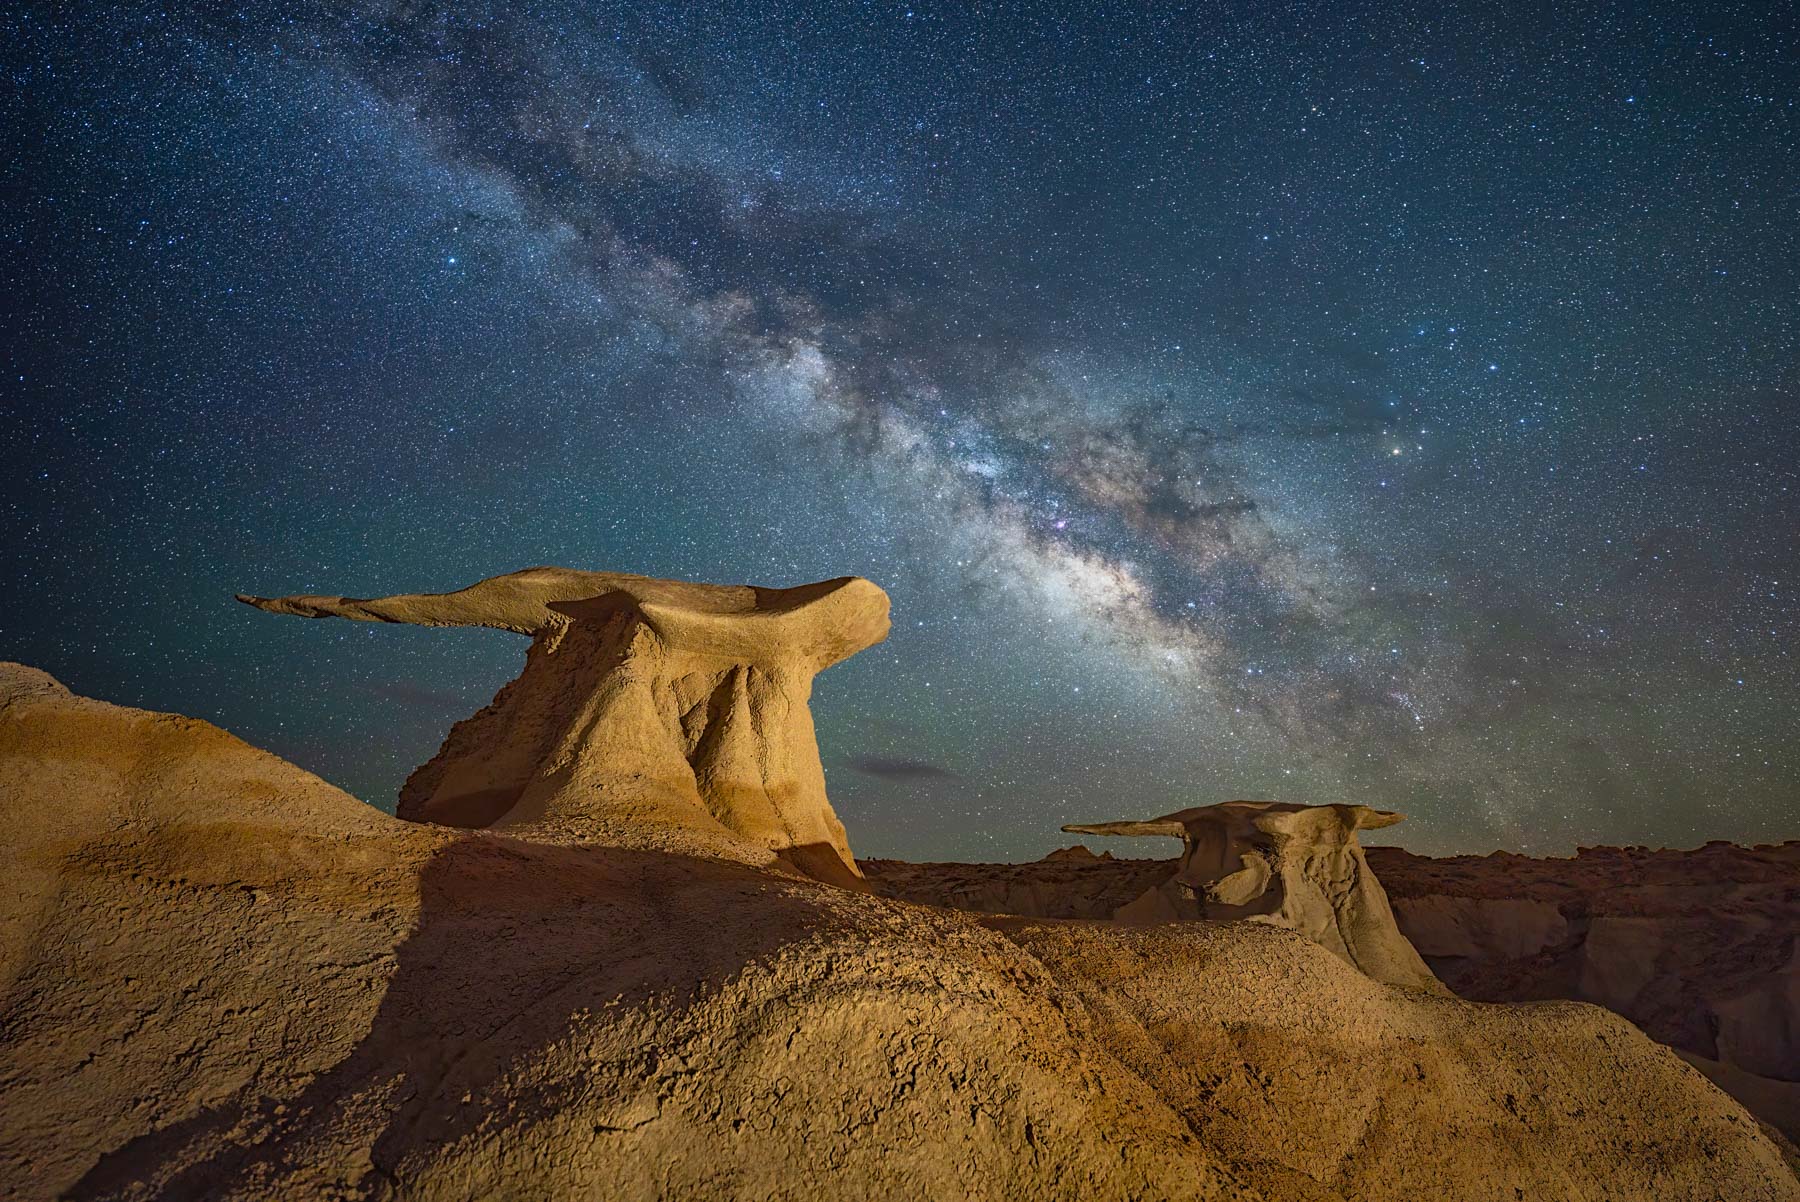 The Wings and the Milky Way in the Bisti Badlands